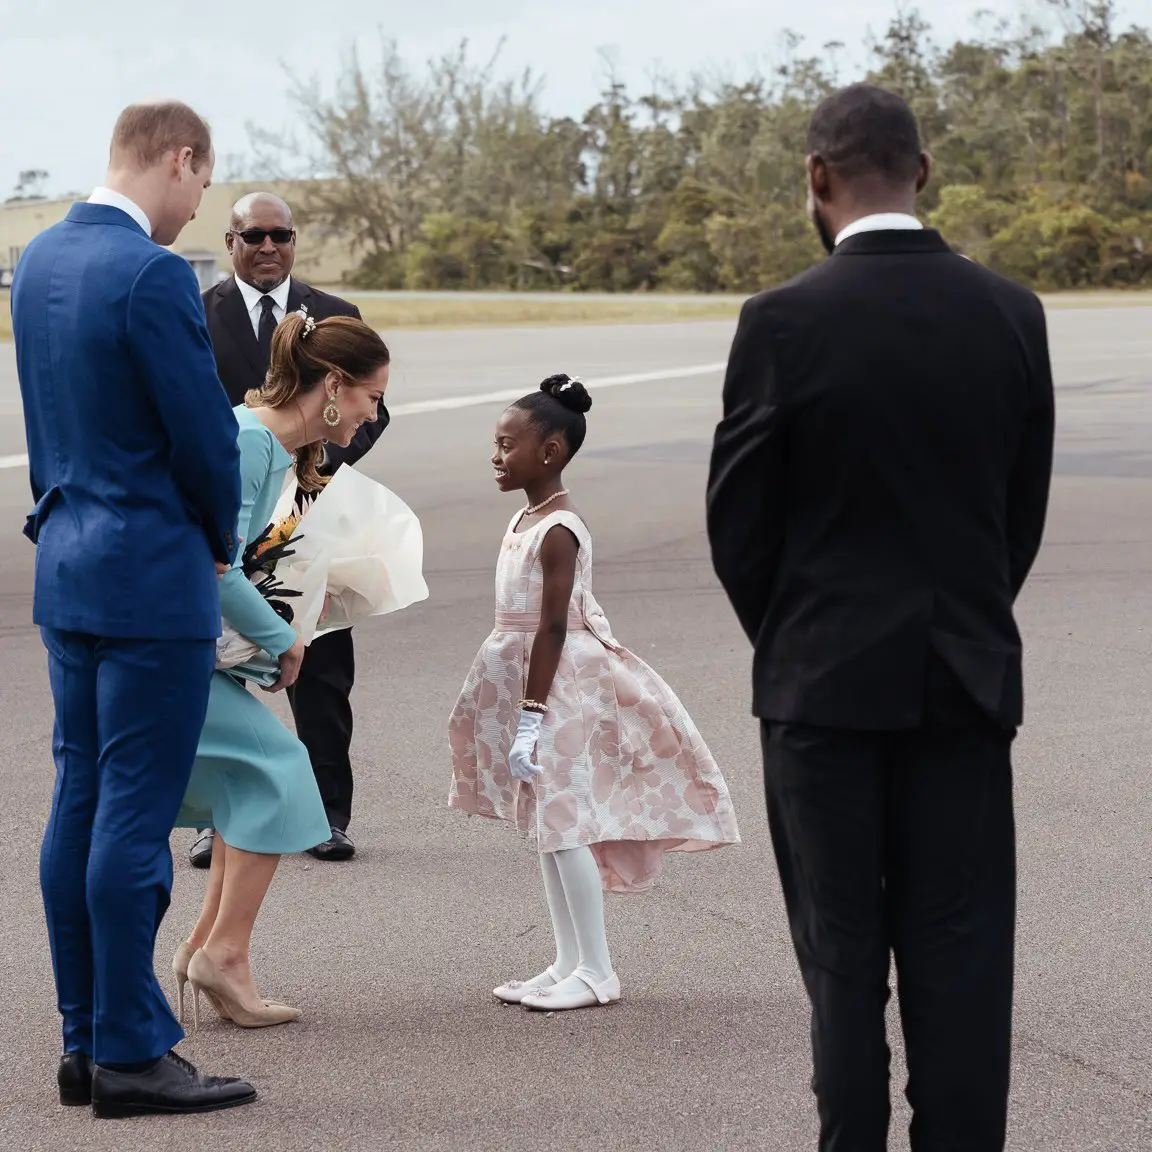 The Duke and Duchess of Cambridge arrived in Bahamas